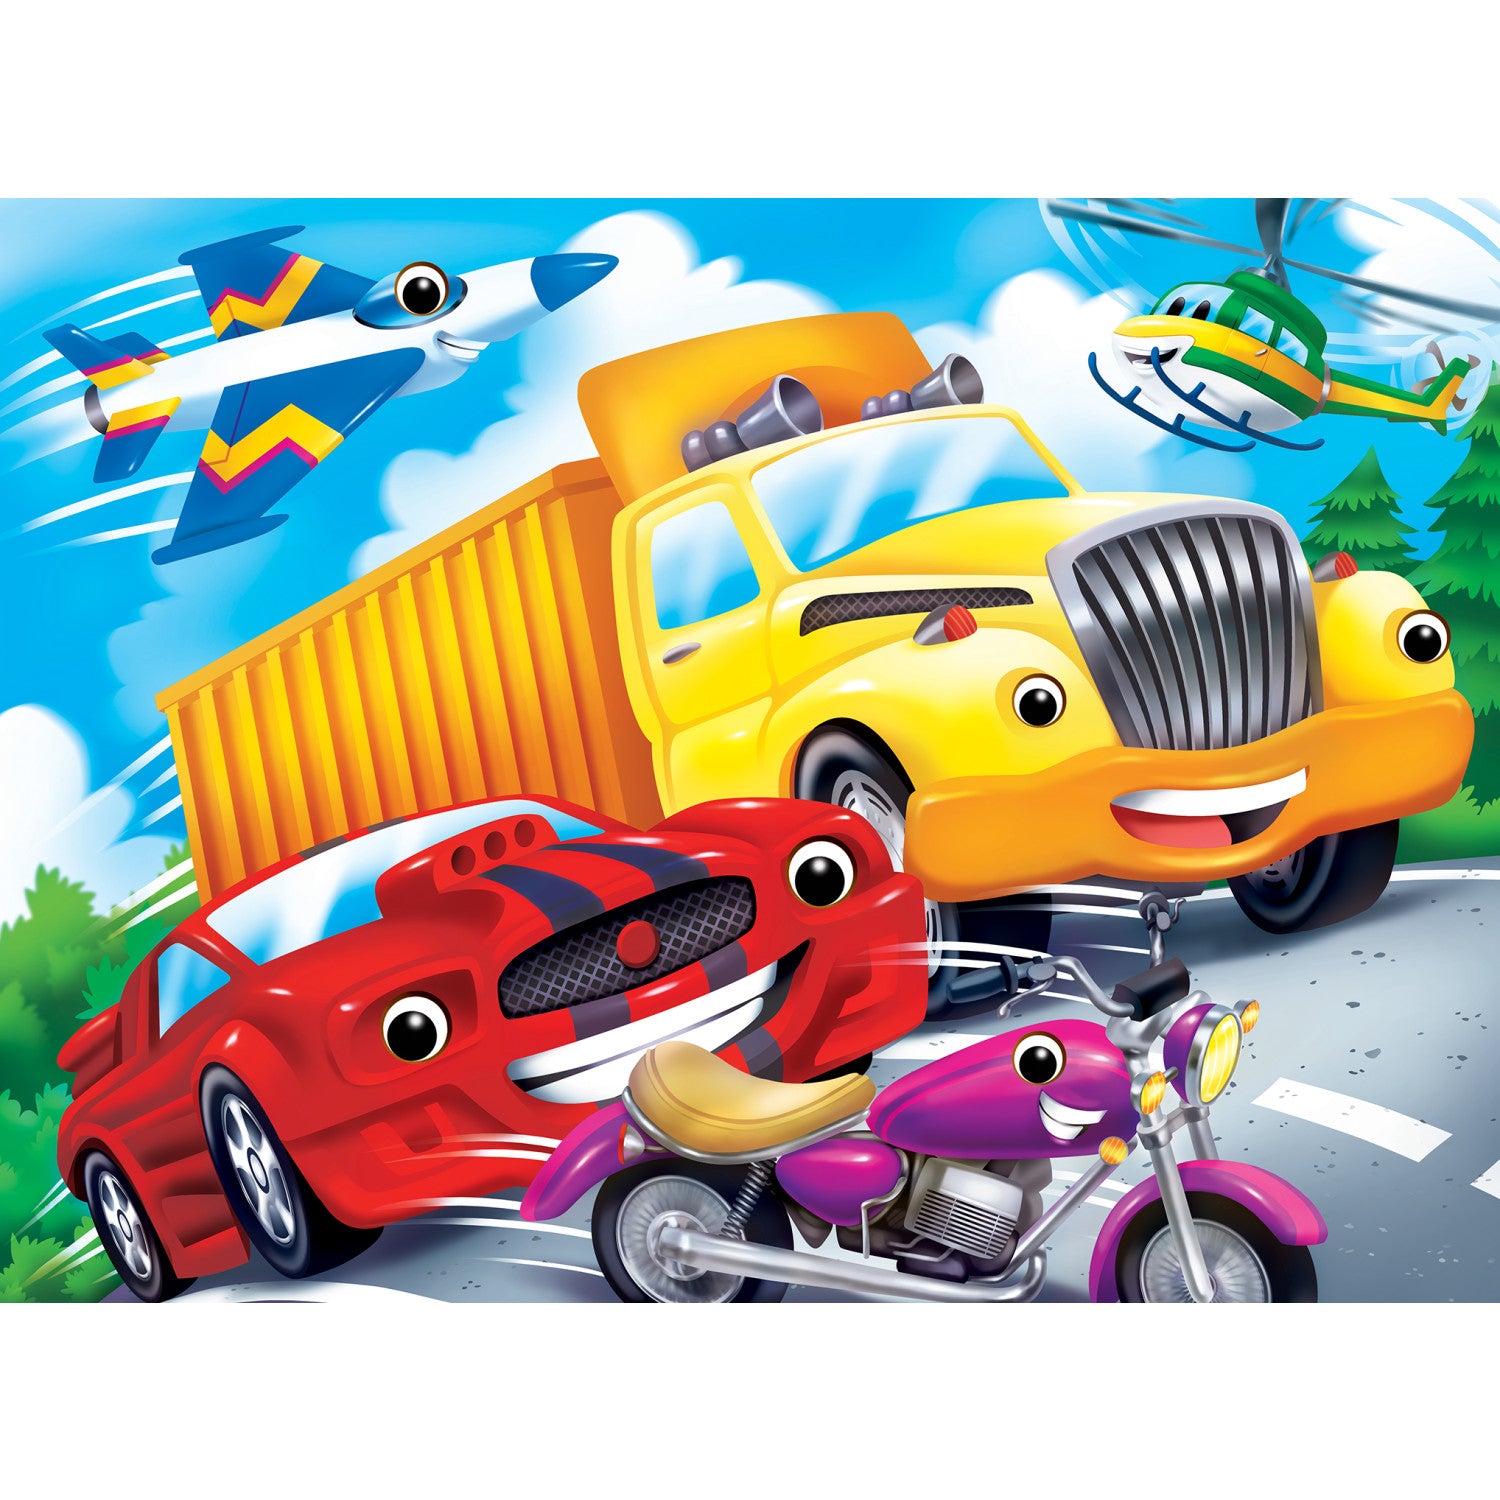 Googly Eyes - Vehicles 48 Piece Puzzle